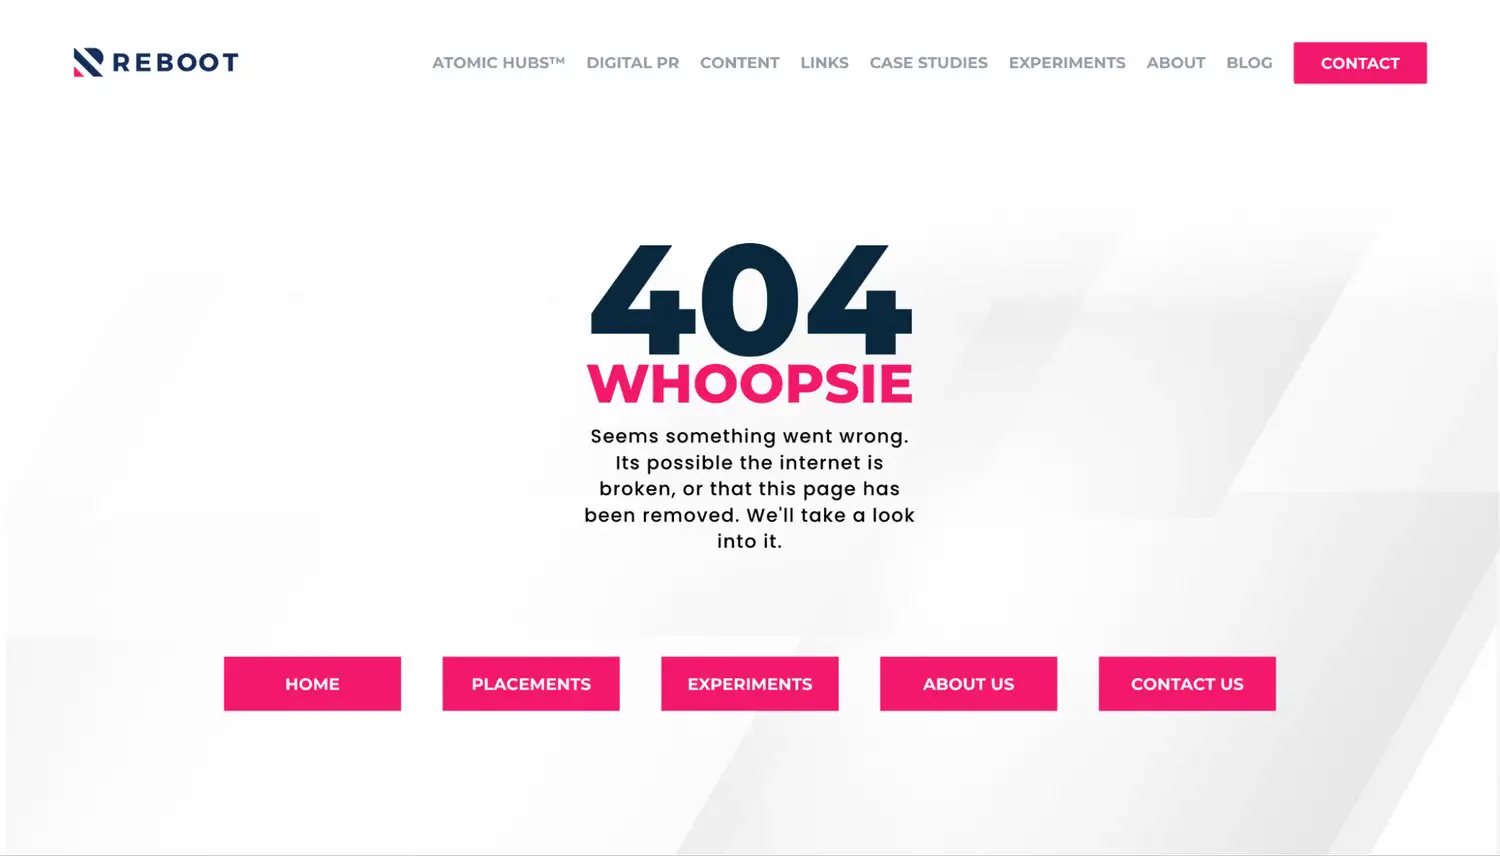 Example of a 404 page on the Reboot site.